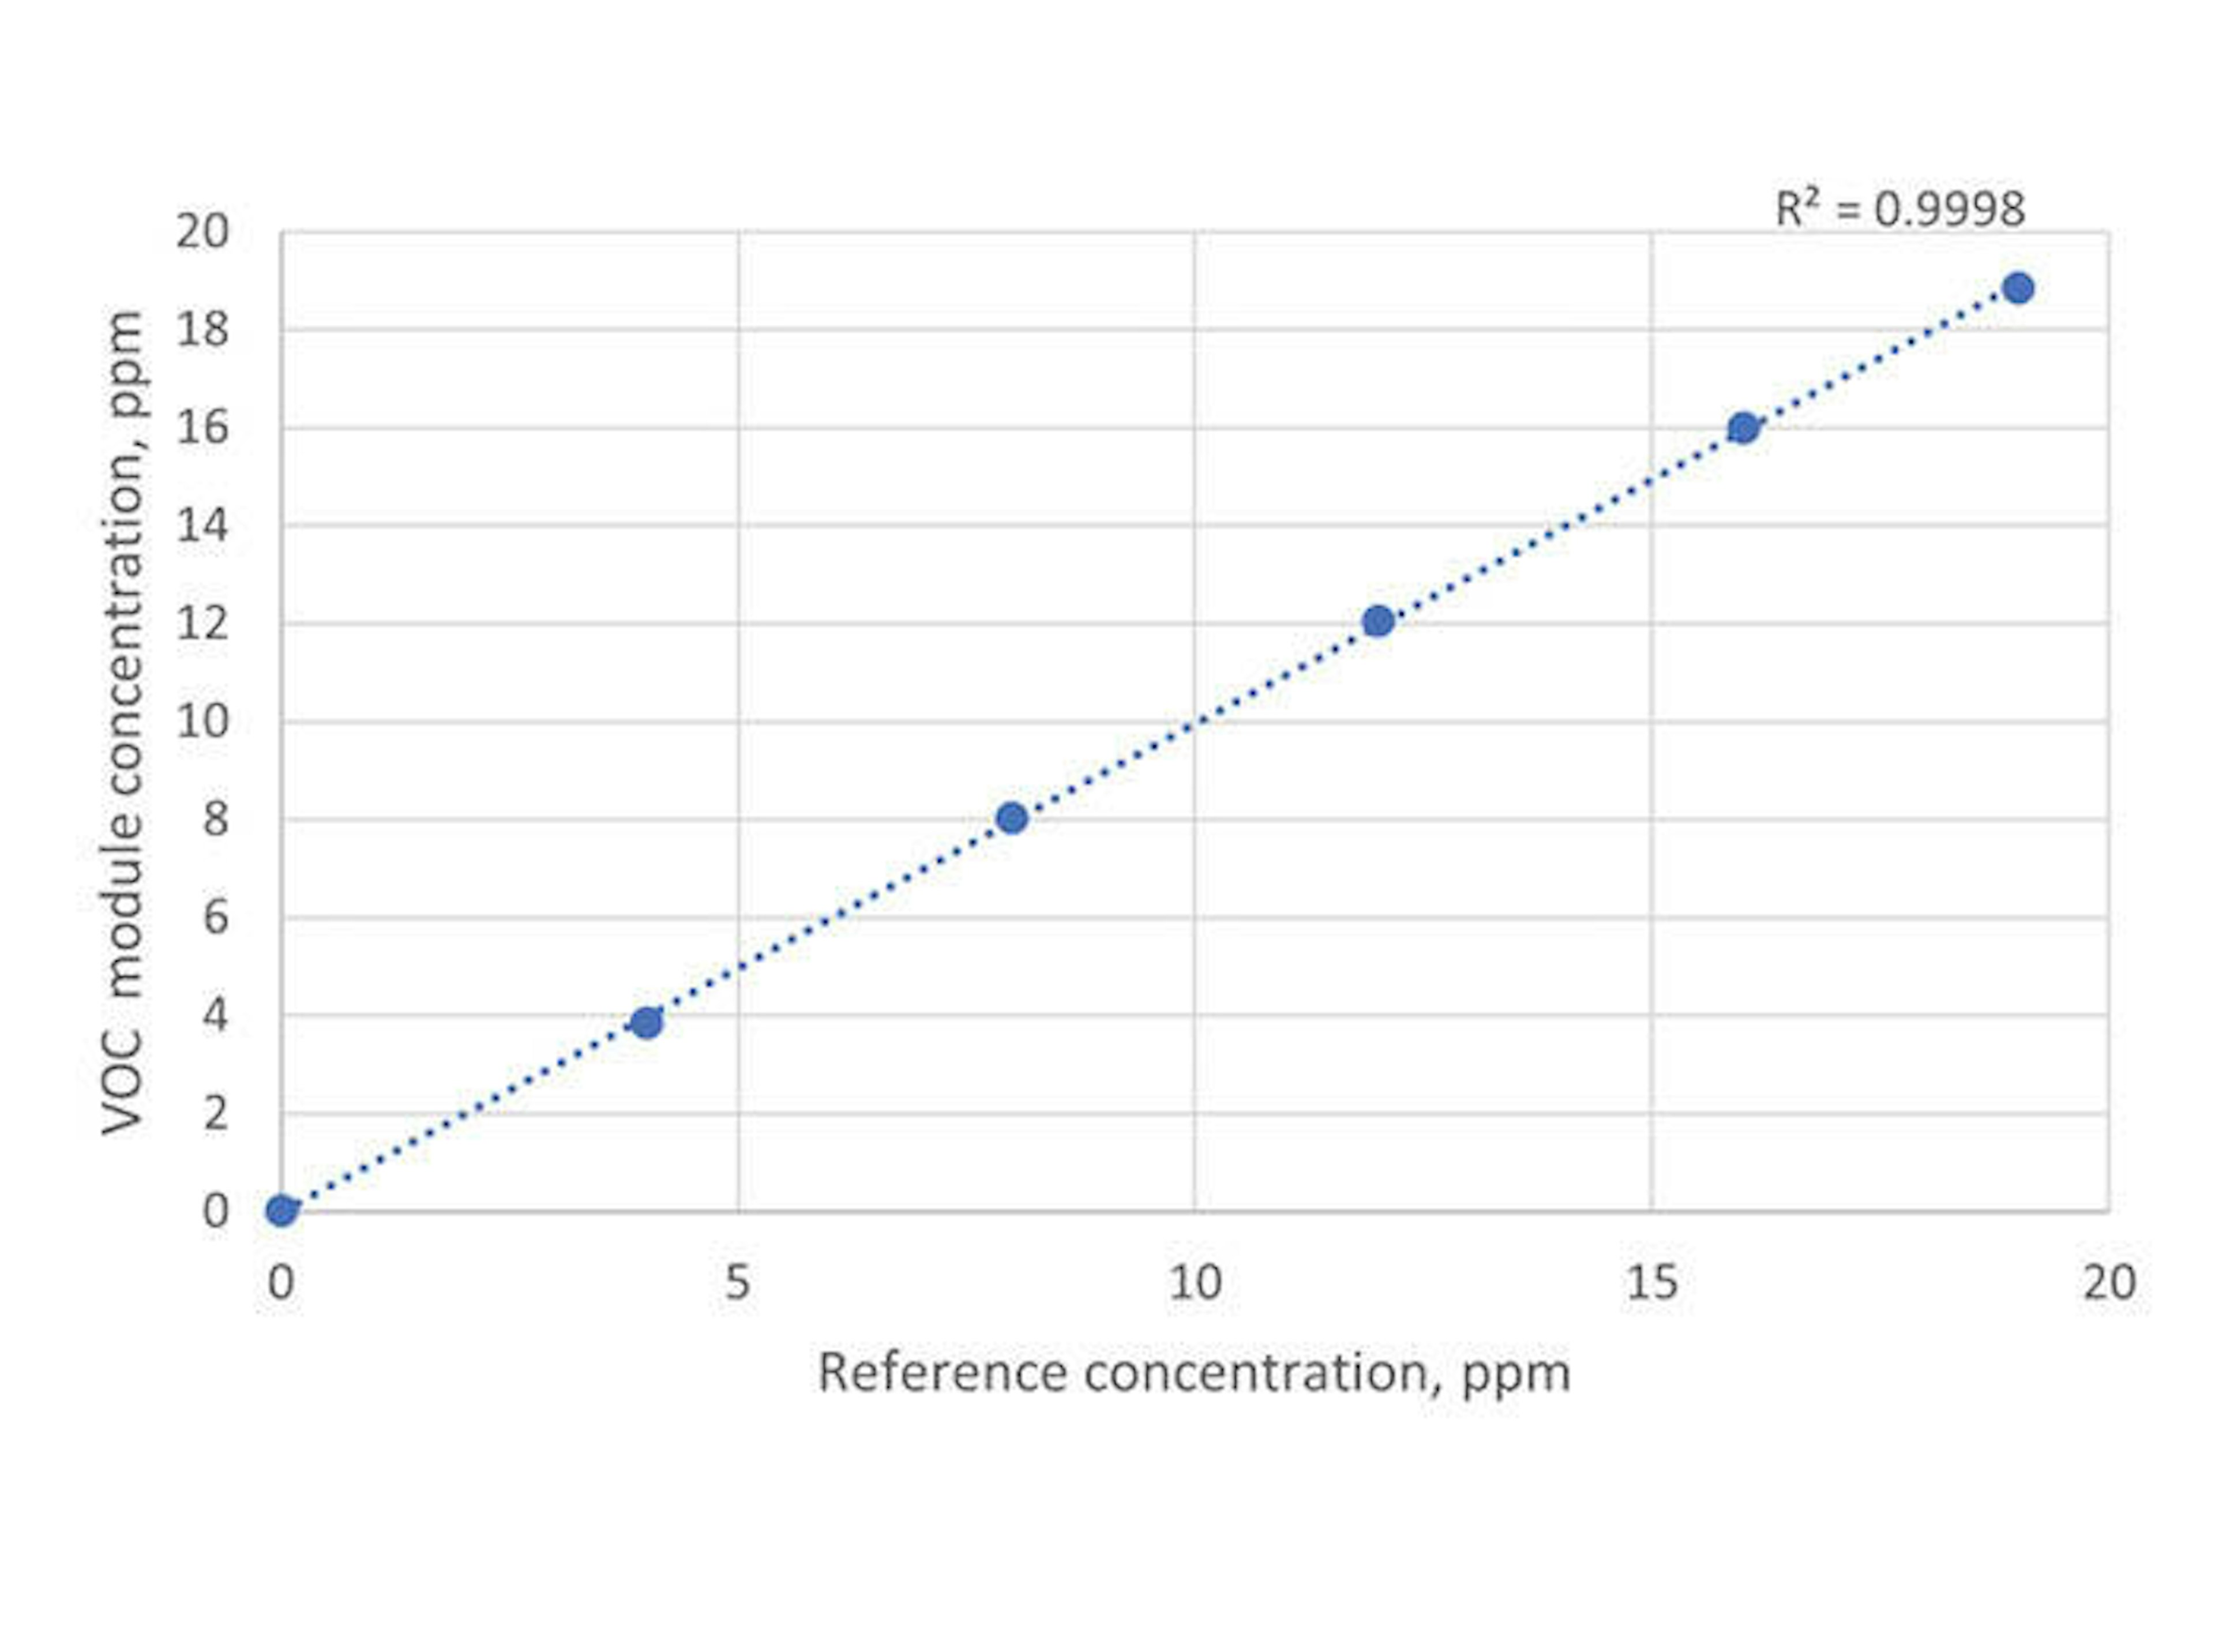 VOC module high range scatter plot of data with linear regression and coefficient of determination